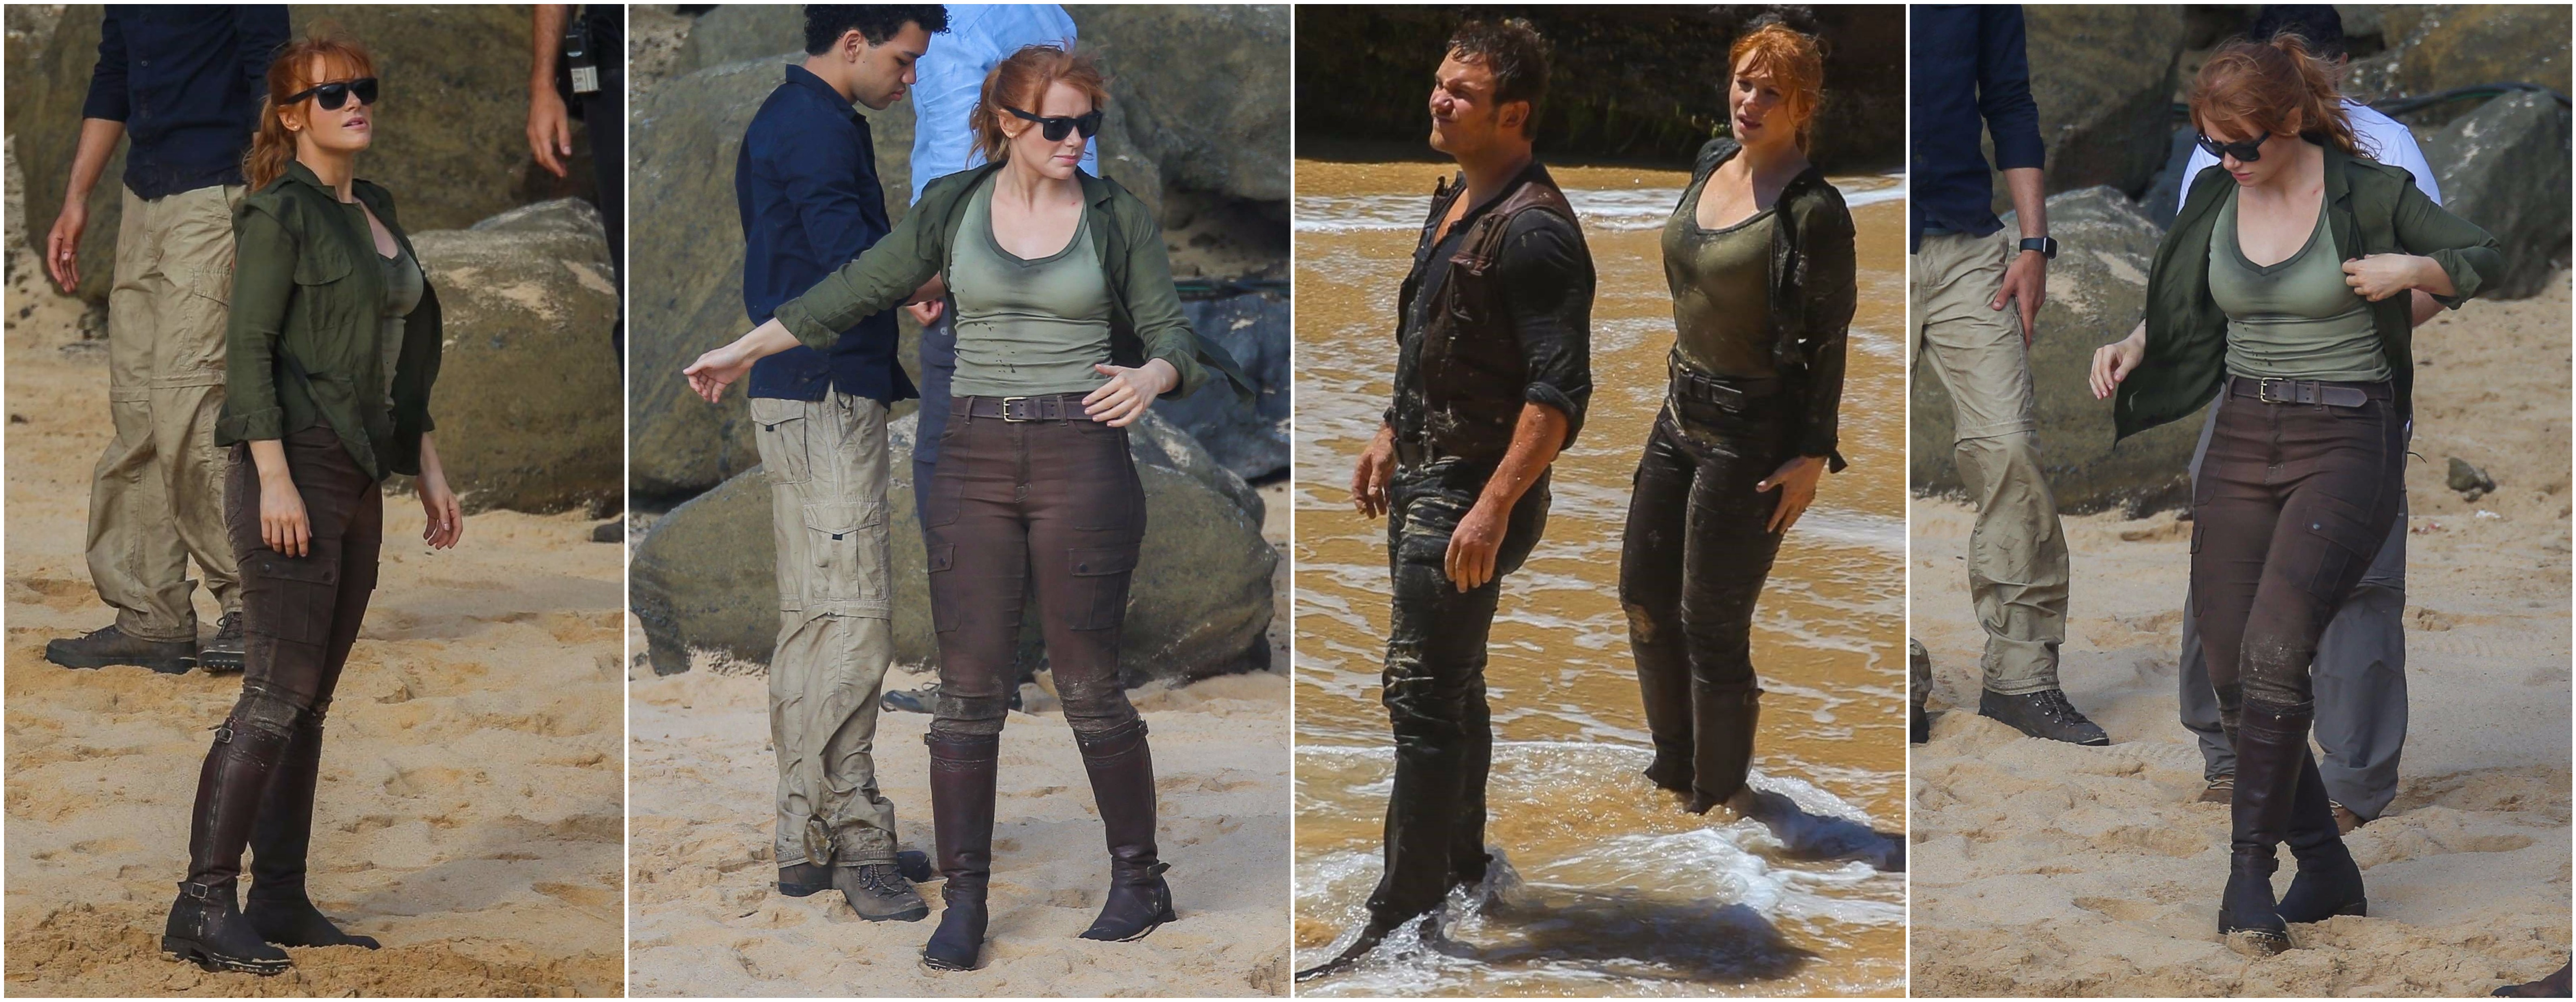 Updated: First look at Chris Pratt, Bryce Dallas Howard & Justice Smith in costume from Jurassic World Fallen Kingdom! (Spoilers)